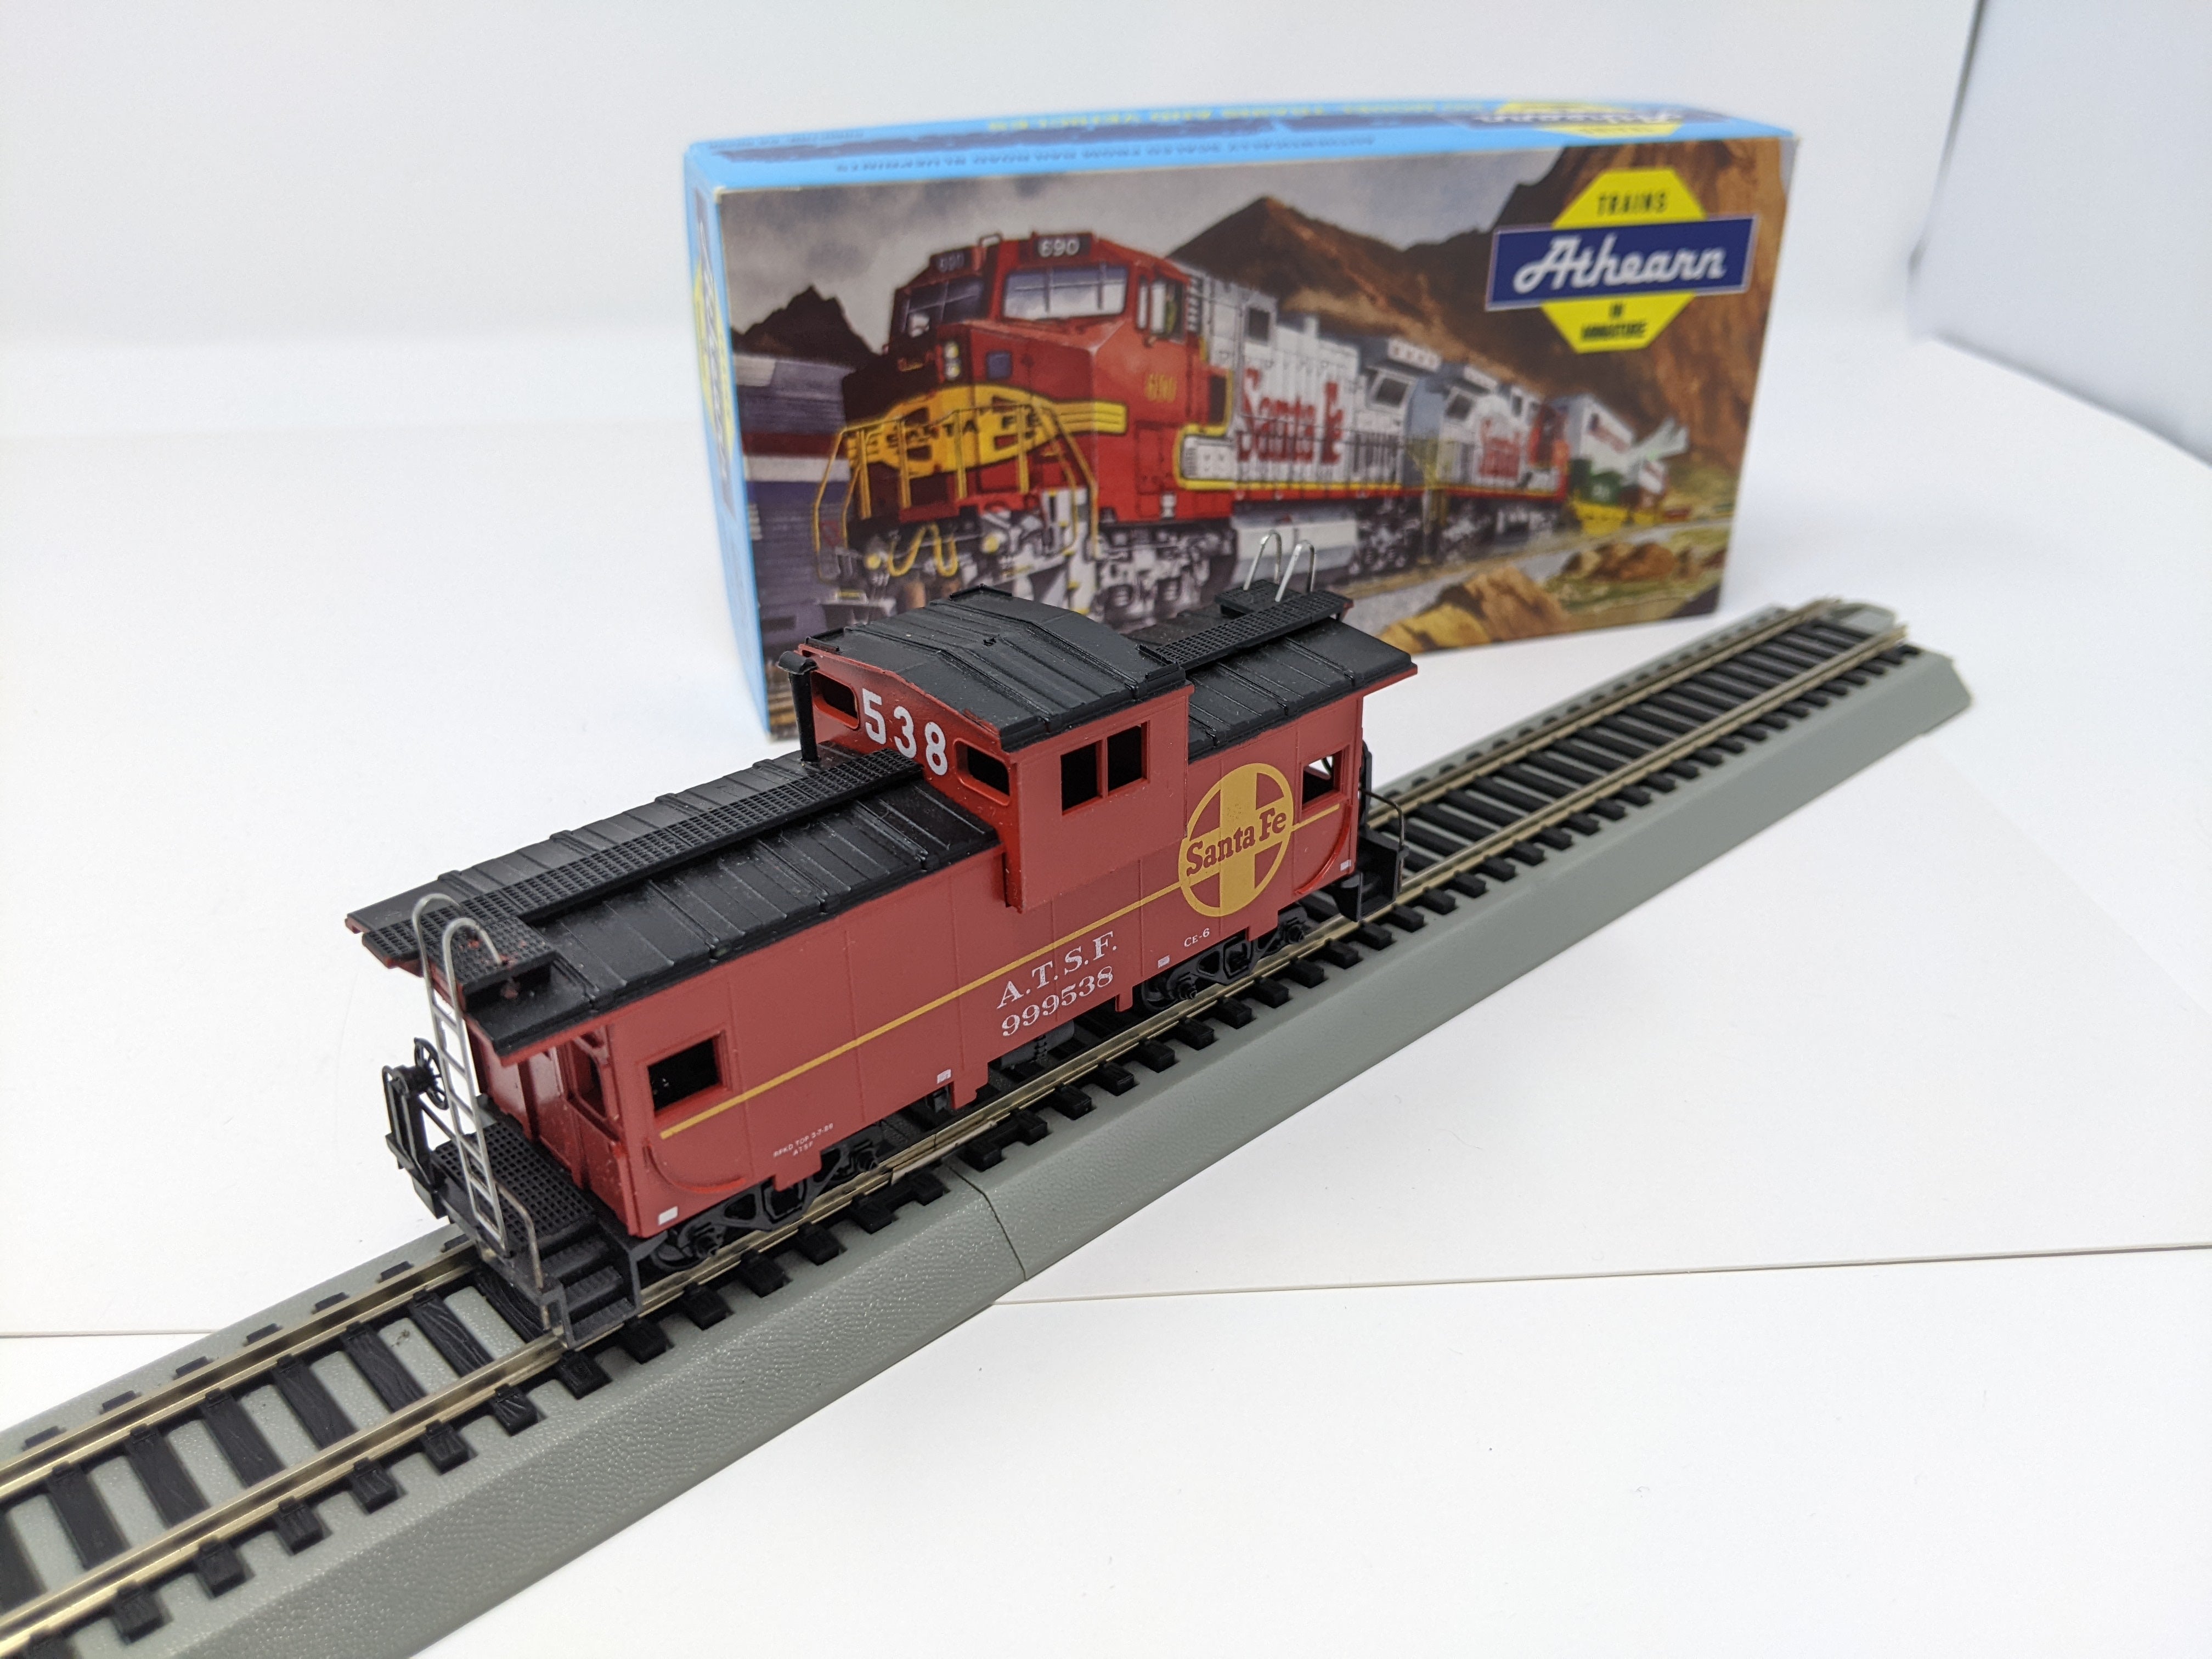 USED Athearn 5367 HO Scale, Wide Vision Caboose, Santa Fe ATSF #999538, No Couplers